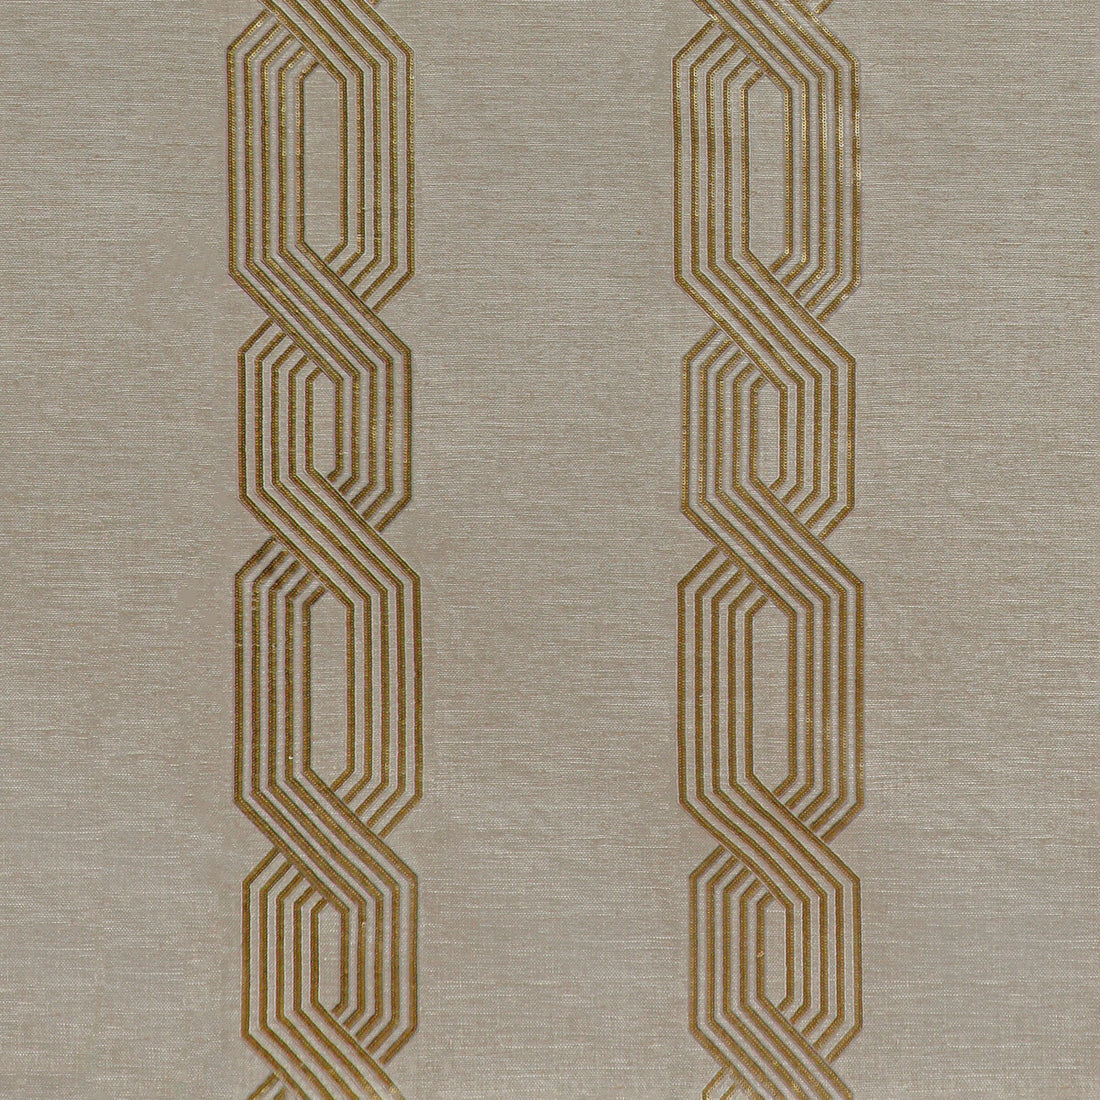 Metalwork fabric in burnished color - pattern 4792.11.0 - by Kravet Couture in the Windsor Smith Naila collection